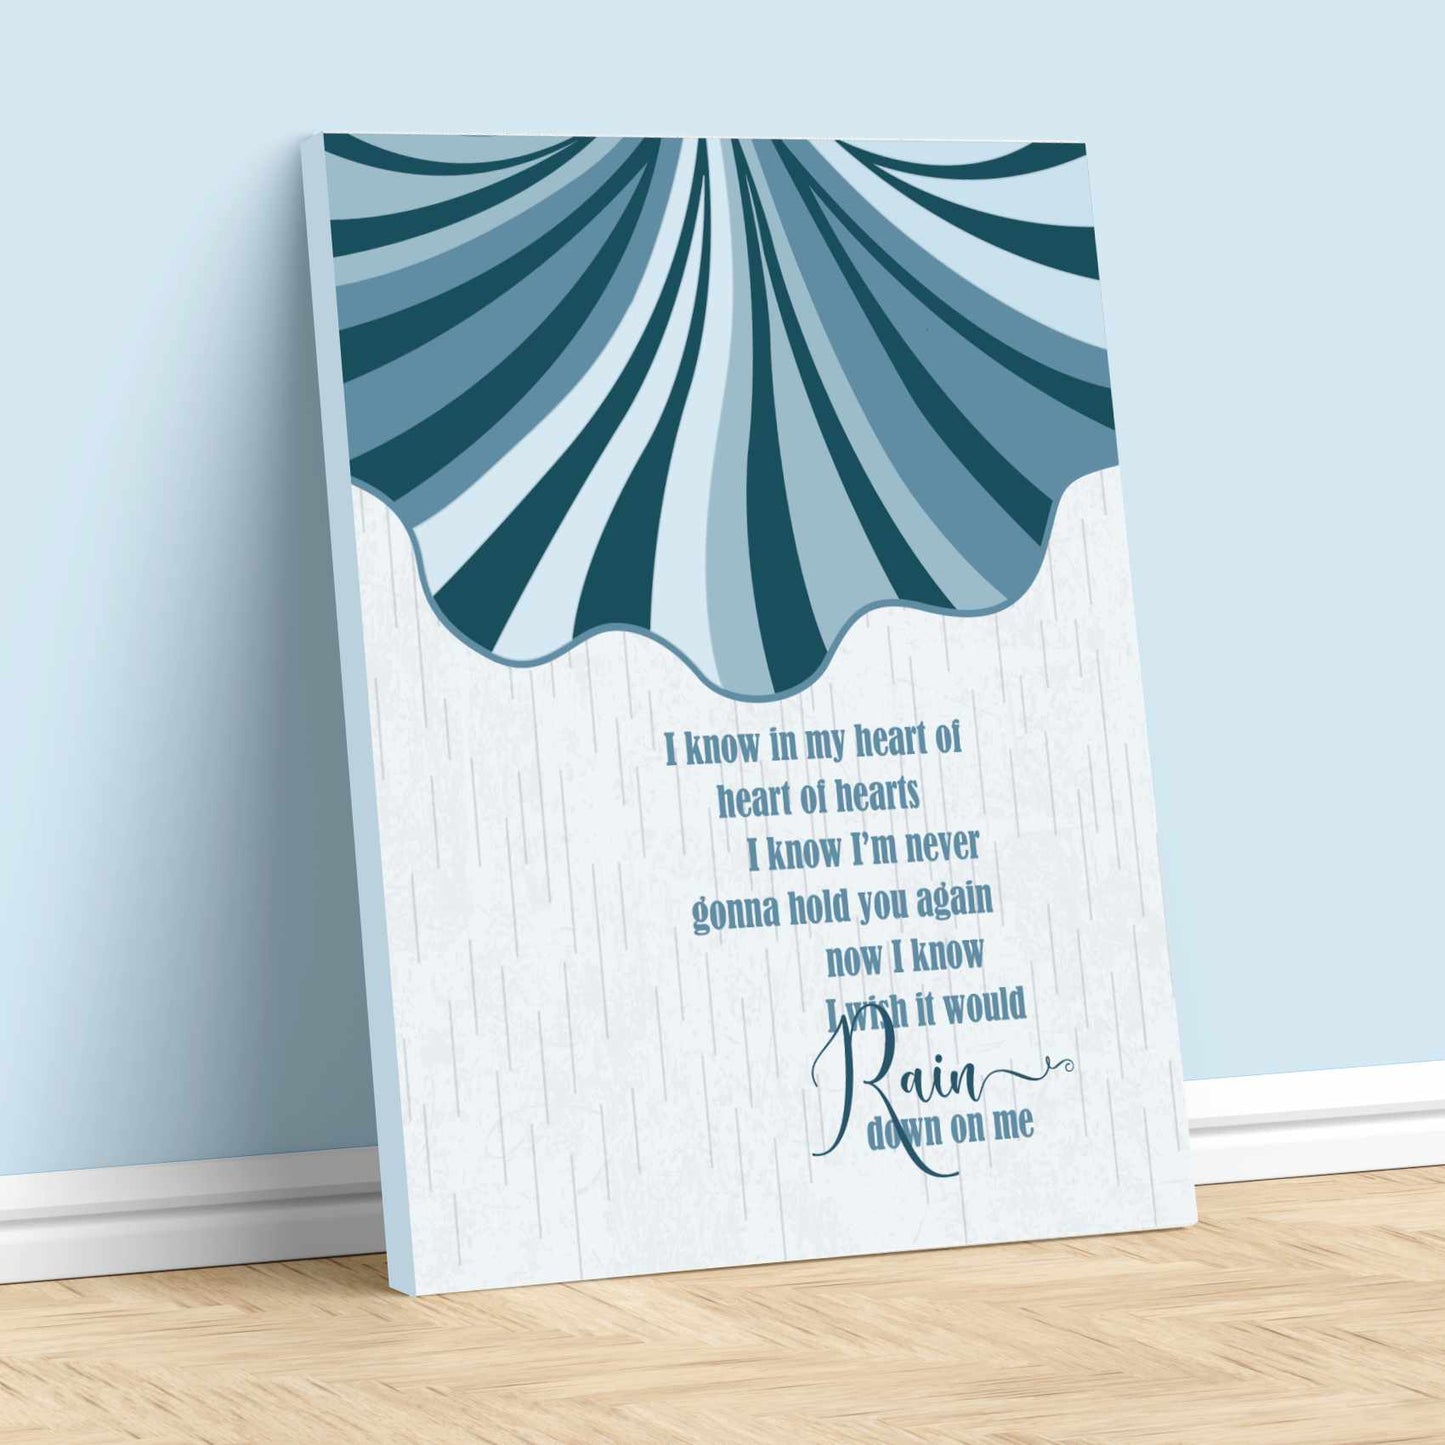 I Wish it Would Rain Down by Phil Collins - Song Lyric Poster Song Lyrics Art Song Lyrics Art 11x14 Canvas Wrap 